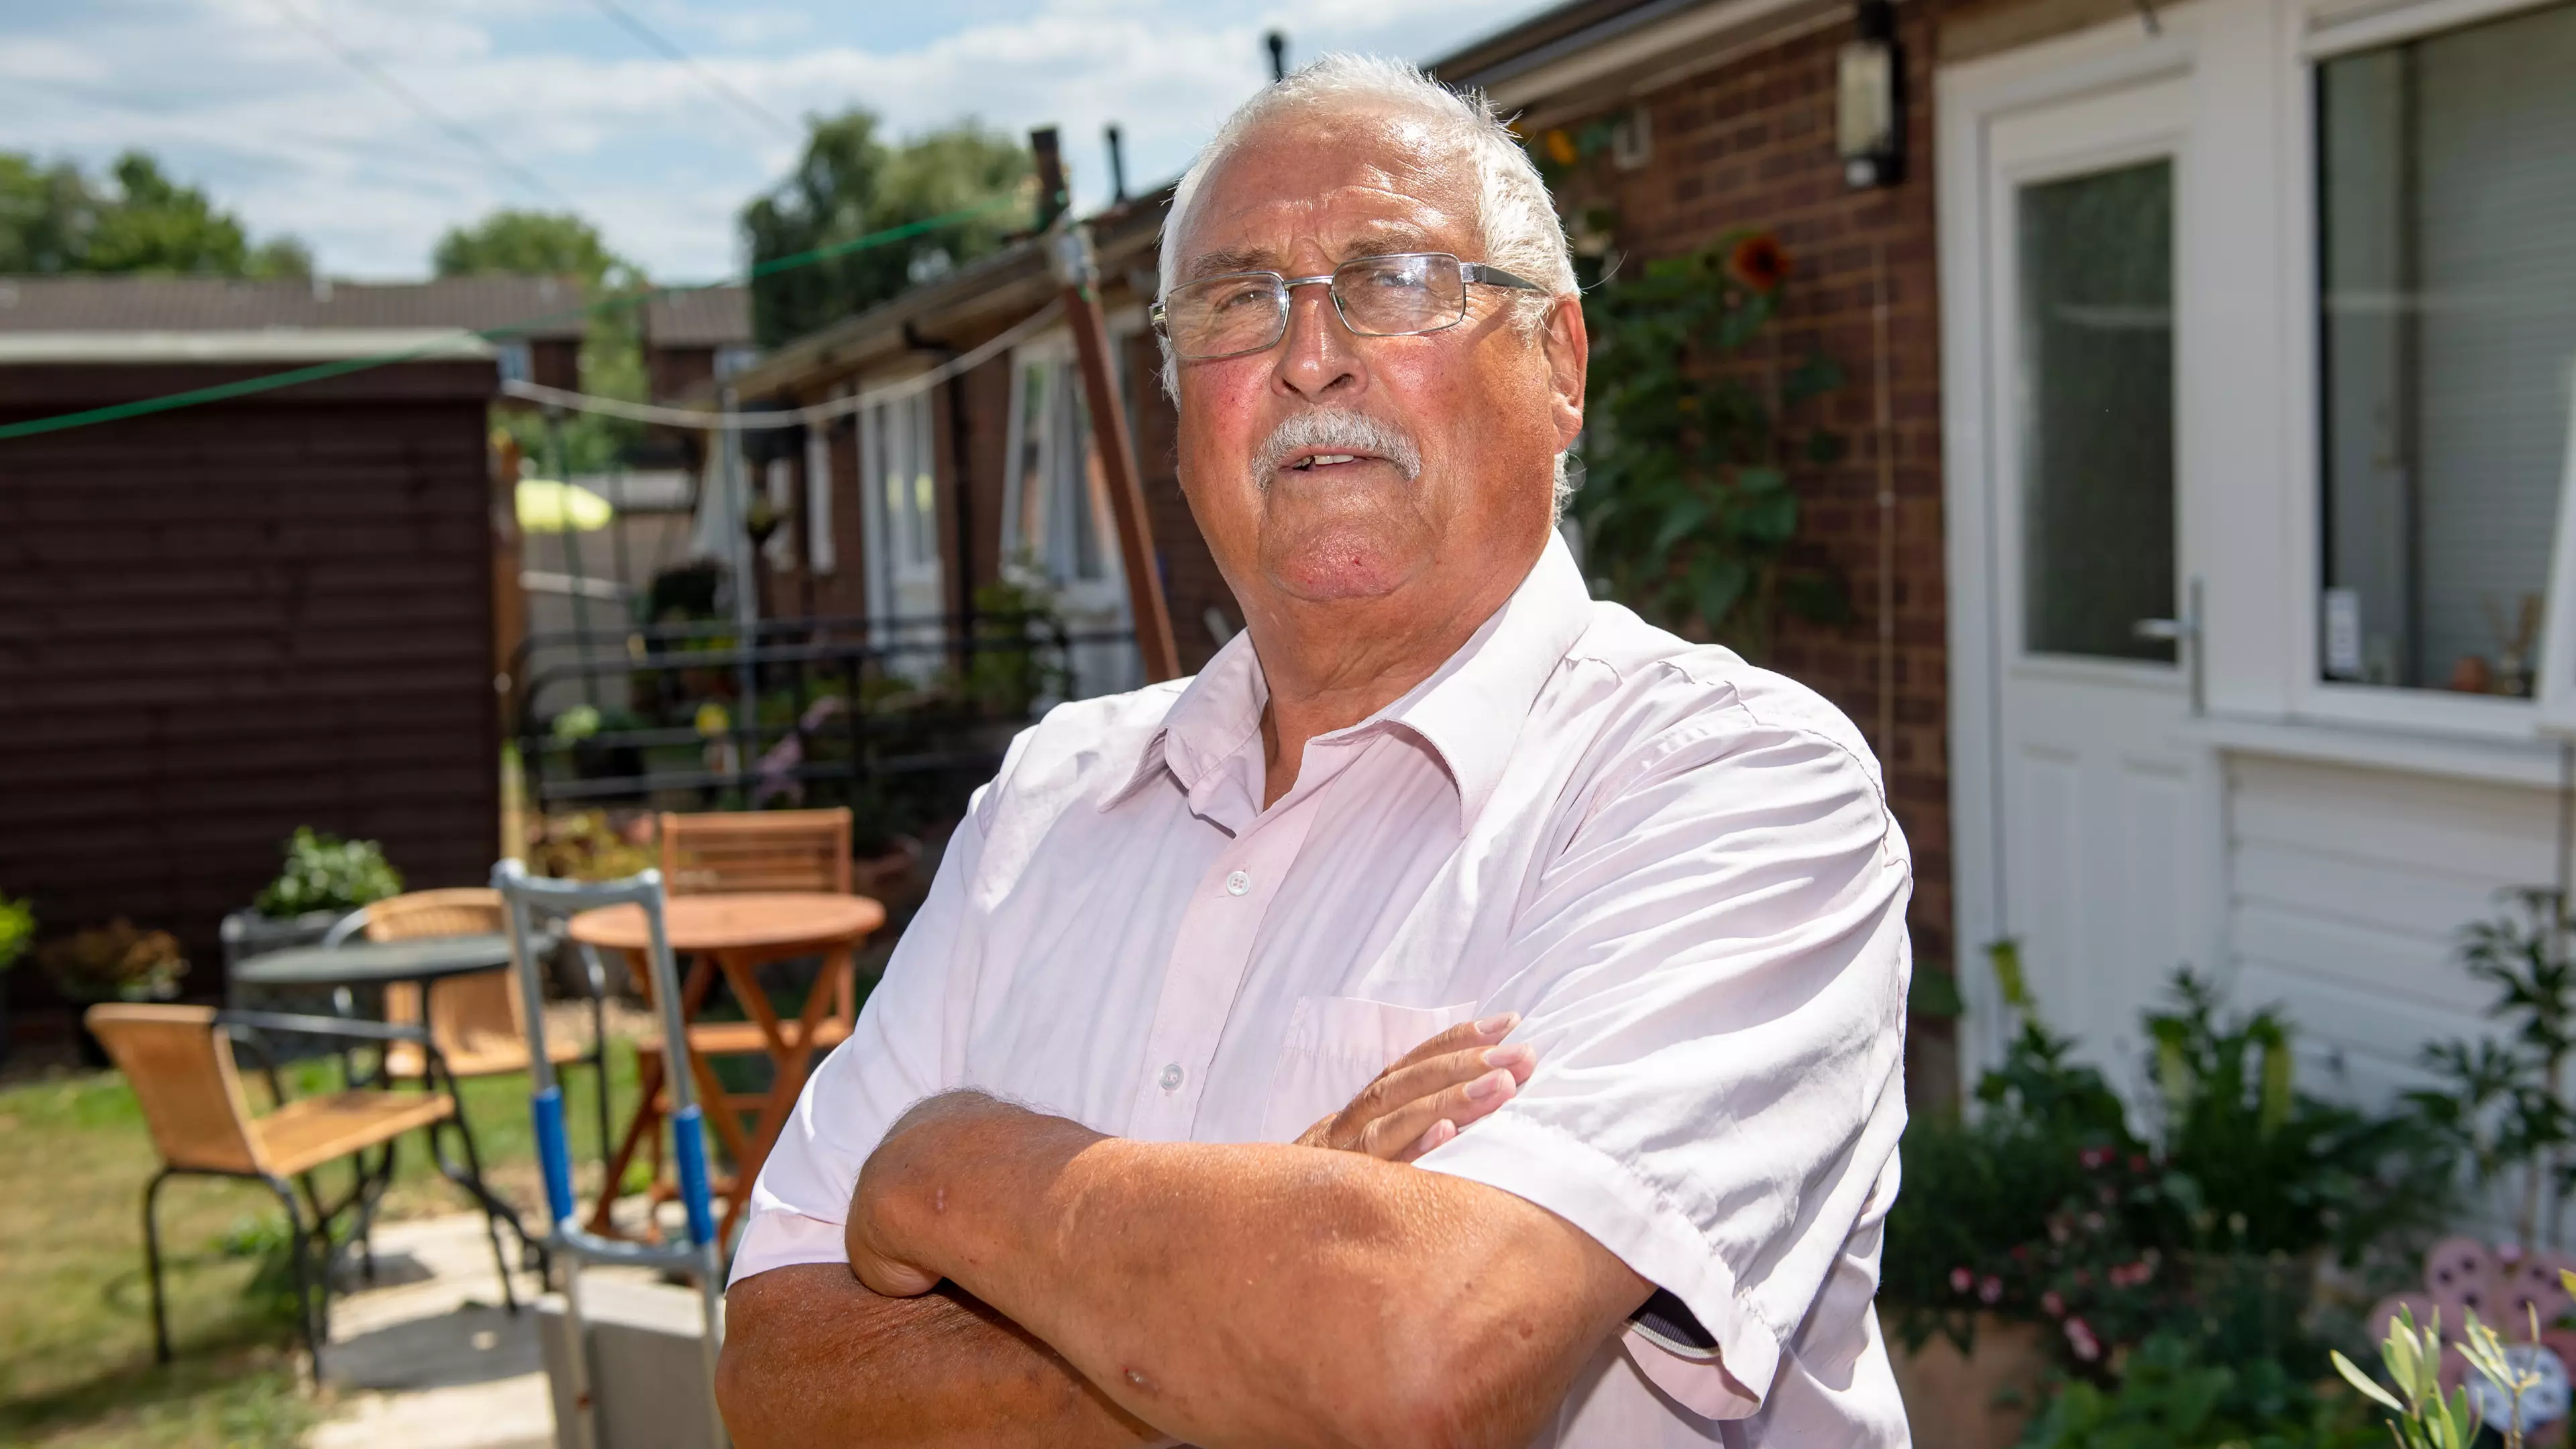 Pensioner Defends Himself After Neighbour Called Police About Excessive Farting